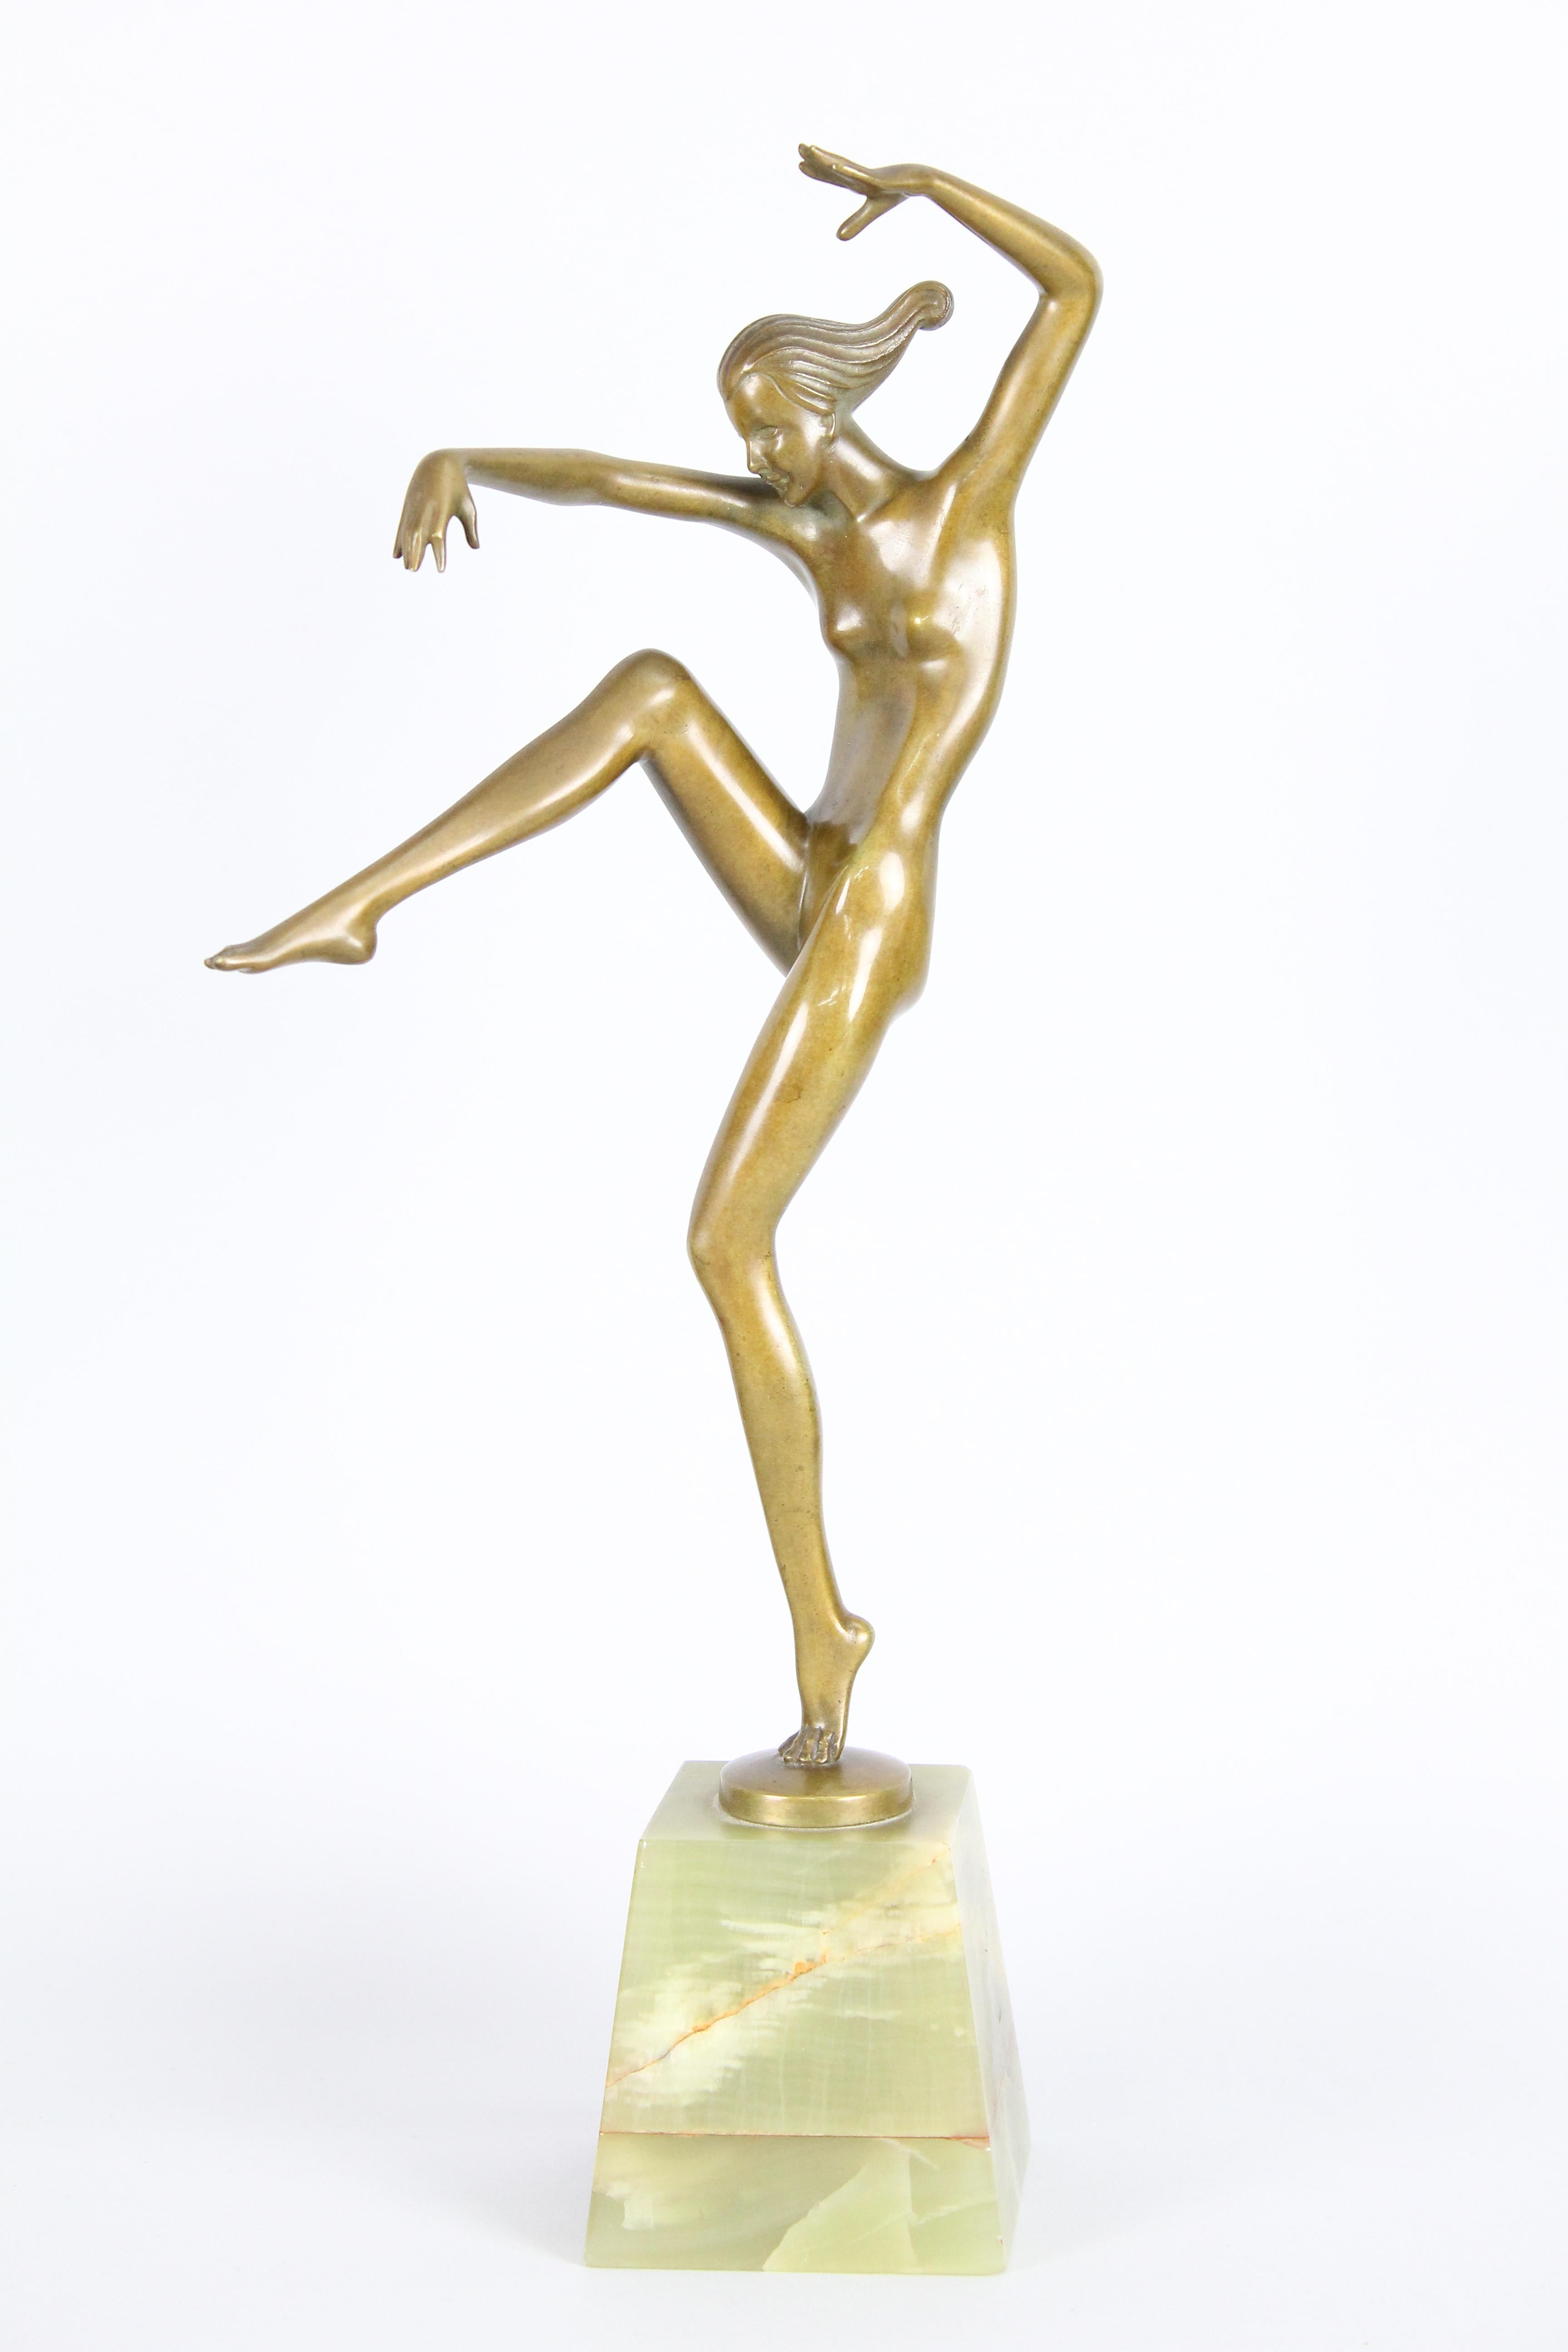 Wonderful sculpture by Dakon that catches the essence of the Art Deco era. Great condition with its original warm golden brown patination. Height with onyx base 30cm, without 24cm.
Signed in the bronze 